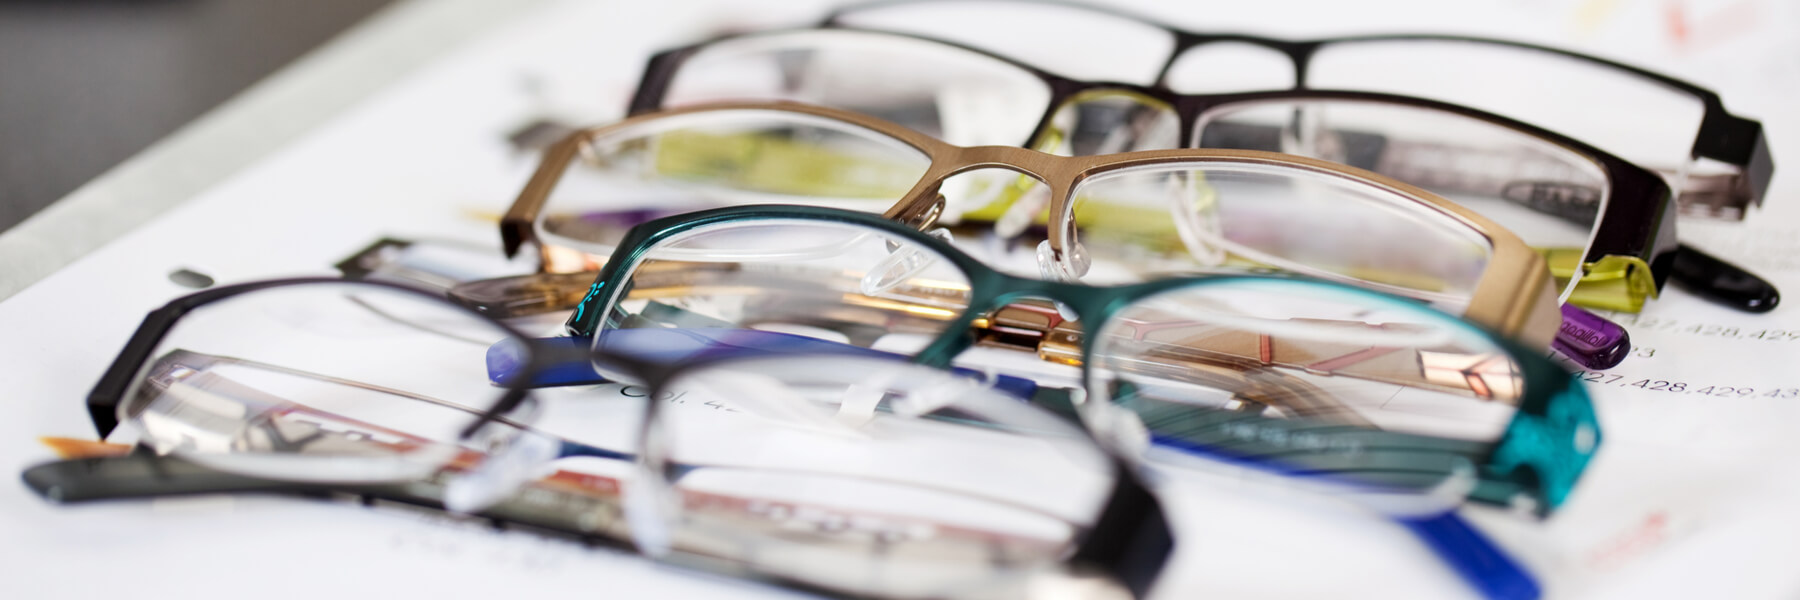 detail view of various eyeglasses lying on a tray, fashion and eyewear, glasses